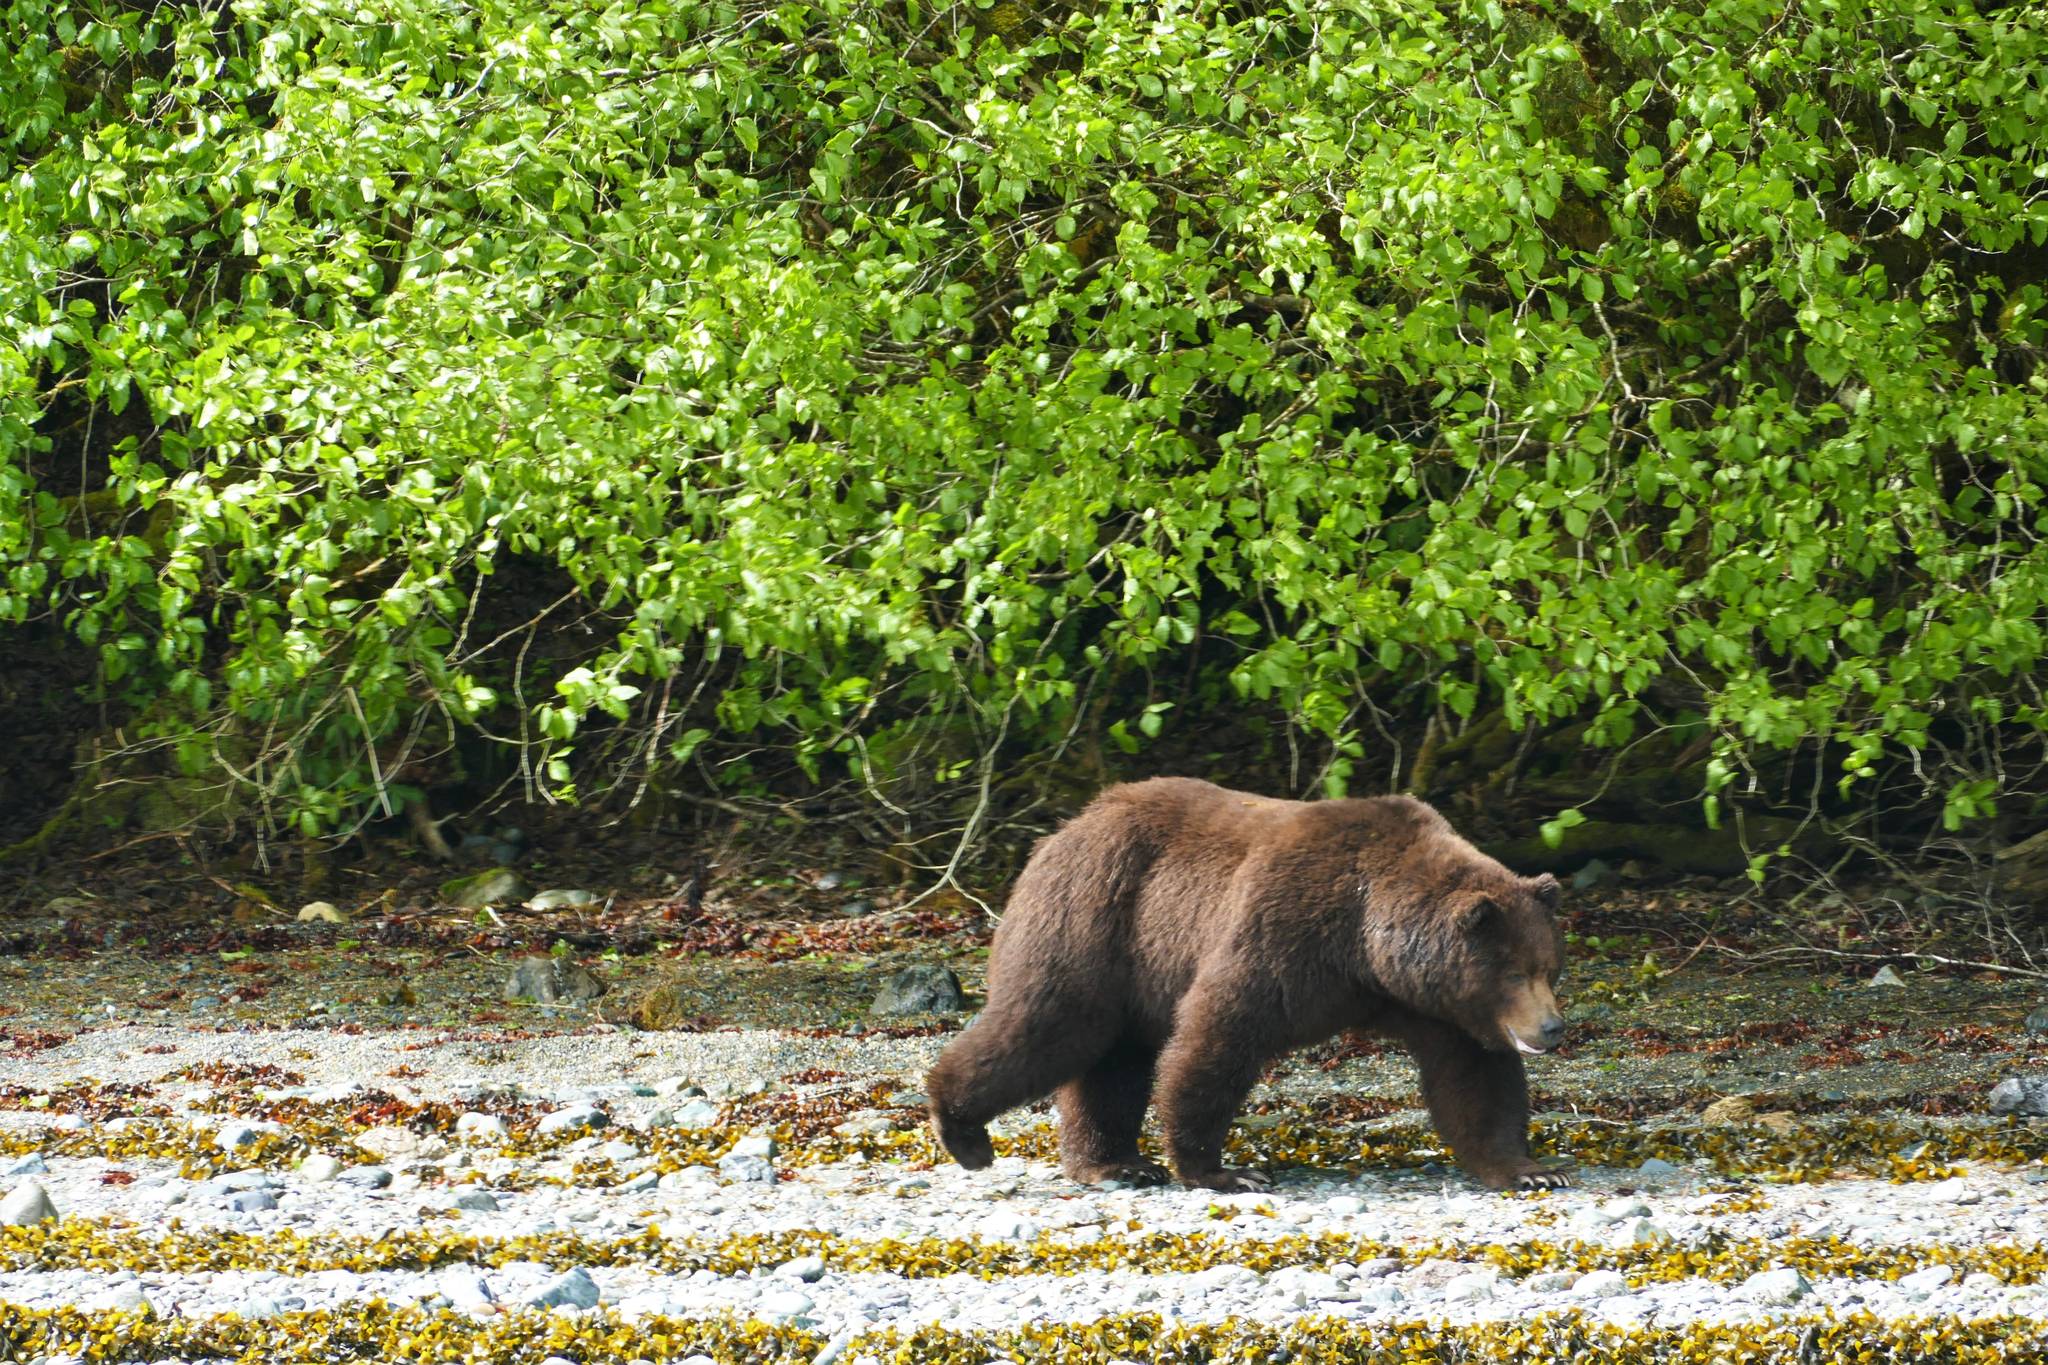 An adult male brown bear nicknamed Smiley at Pack Creek walks by Mike Janes and the author. (Photo by Bjorn Dihle)